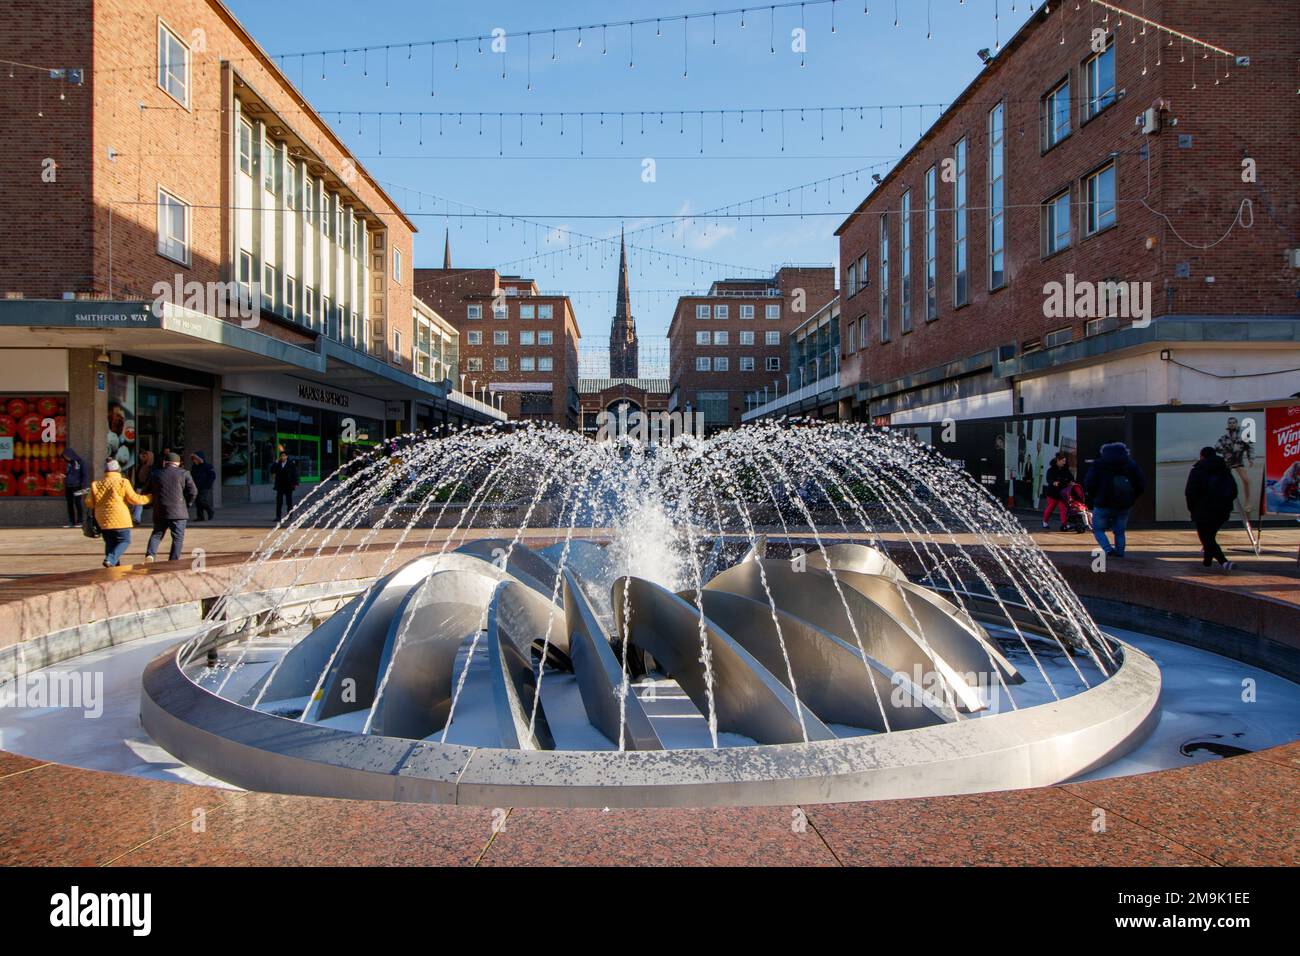 The fountain centrepiece in Smithford Way in the centre of Coventry between the upper and lower precincts. The whole area was renovated for the City of Culture 2021. The view from the fountain looks up upper precinct towards the spire of Holy Trinity Church in the distance. Stock Photo